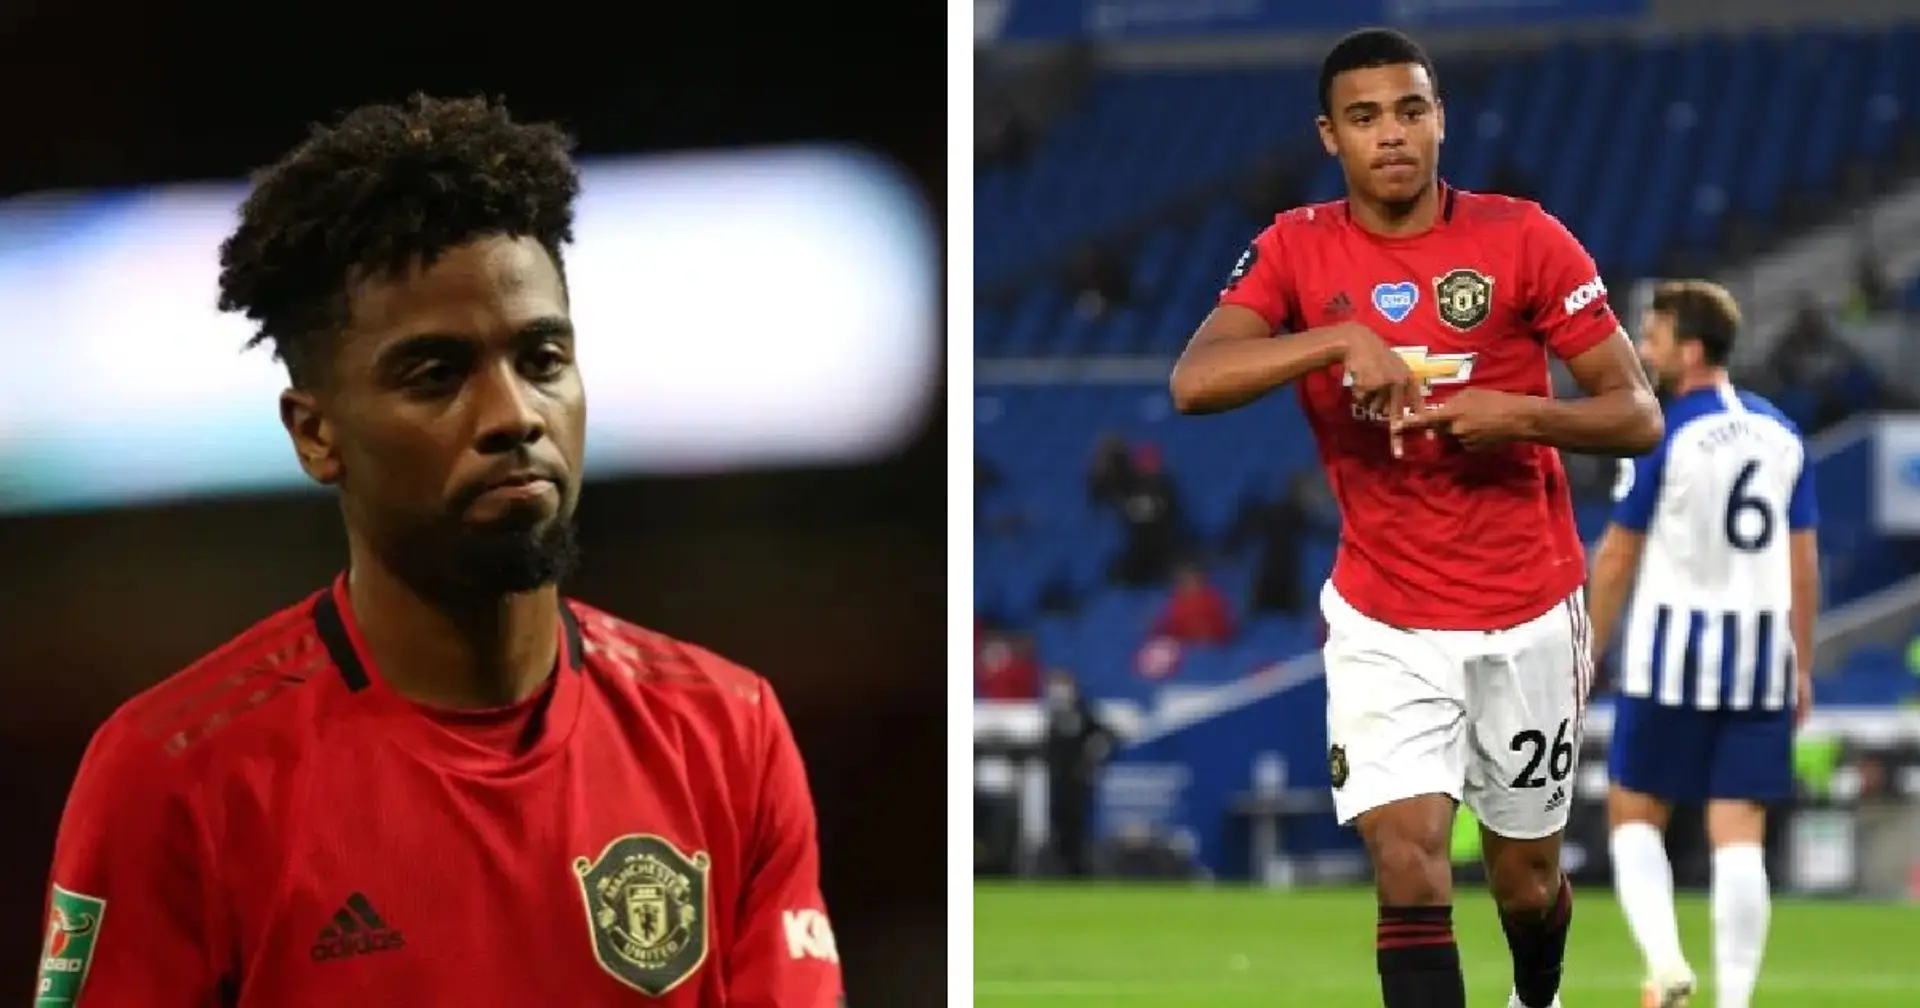 Angel Gomes reacts to Mason Greenwood dedicating goal in Brighton game to him